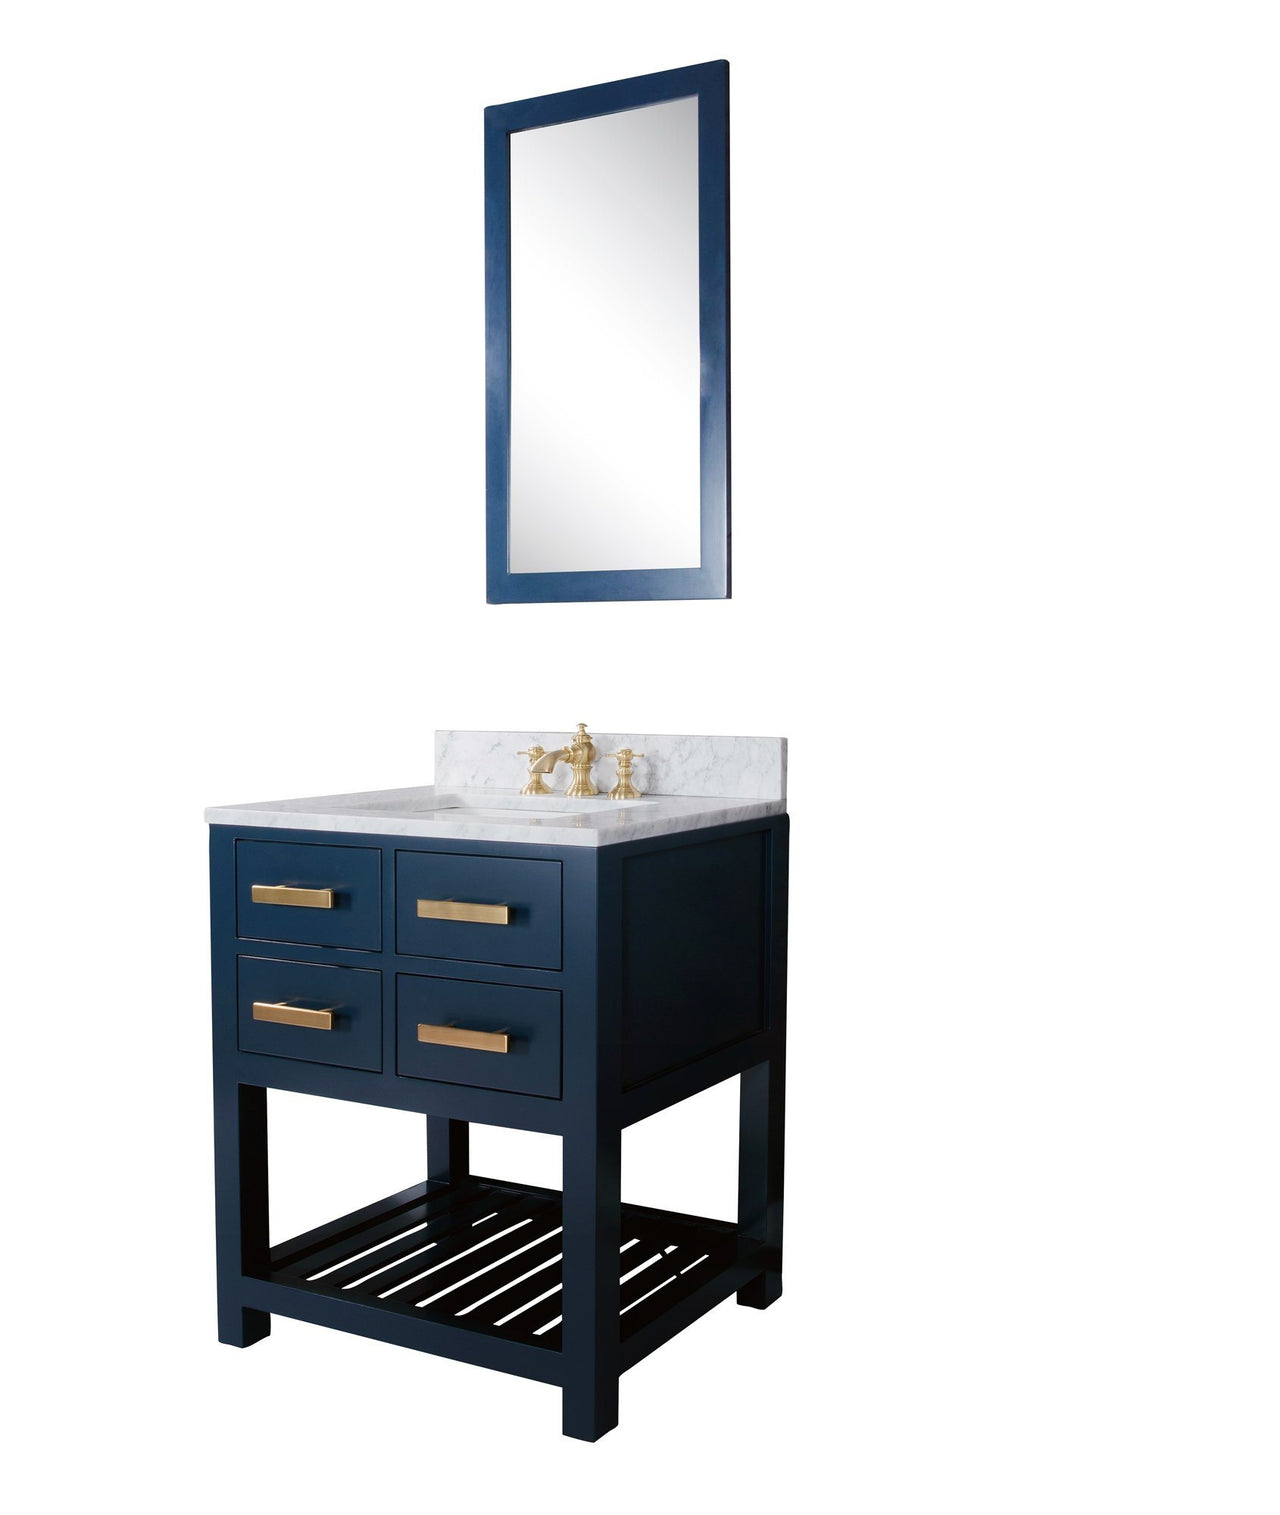 30 Inch Monarch Blue Single Sink Bathroom Vanity With F2-0013 Satin Brass Faucet And Mirror From The Madalyn Collection Vanity Water Creation 